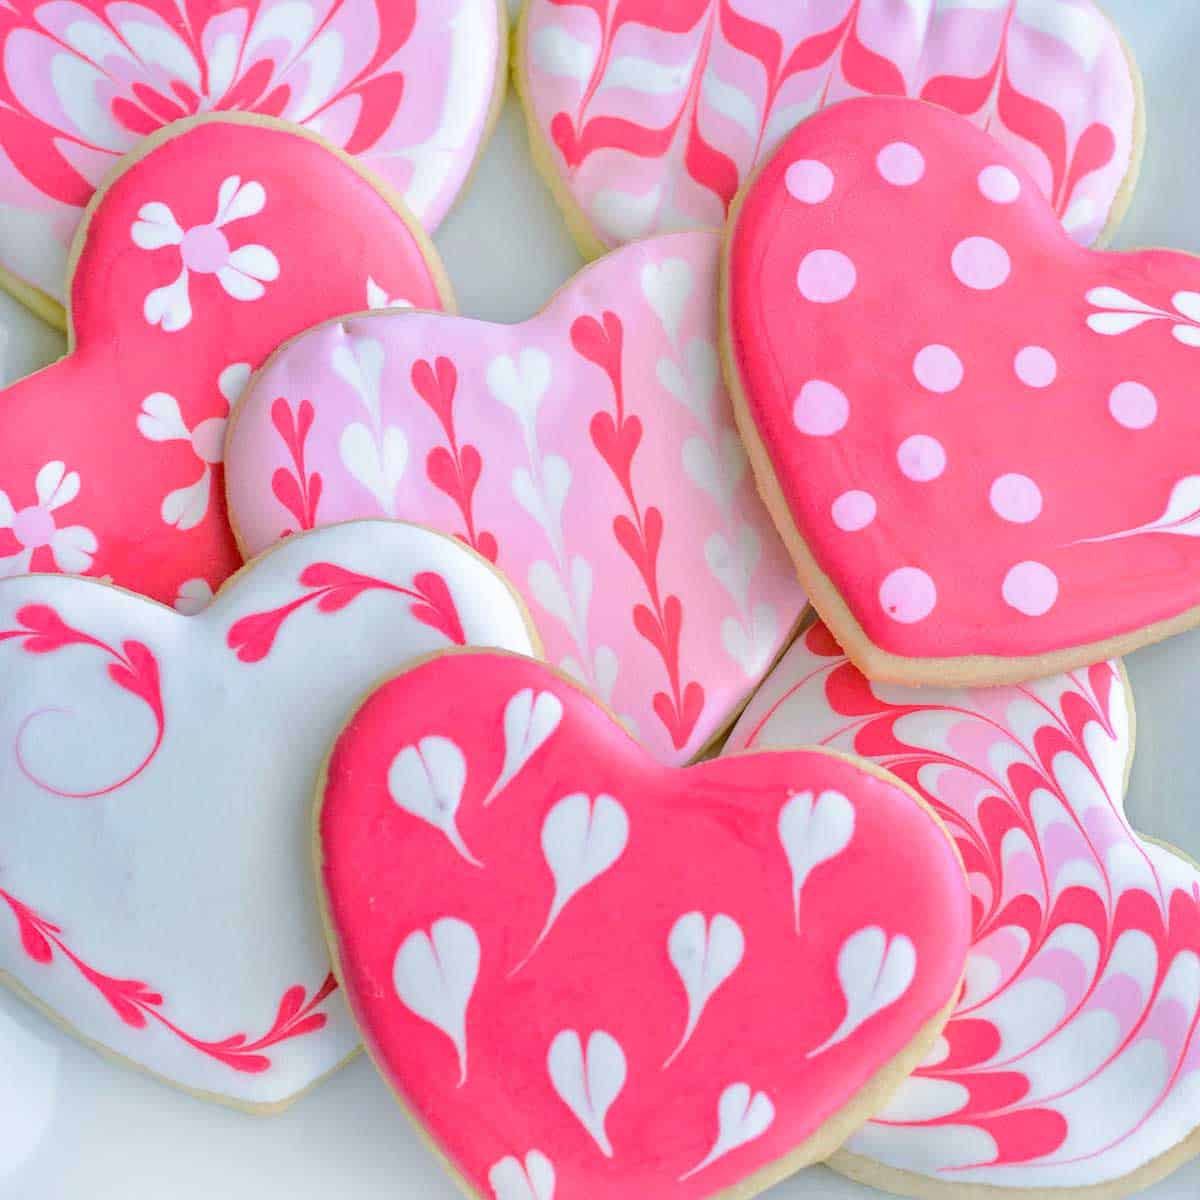 Heart Shaped Cookies with EASY Royal Icing Recipe